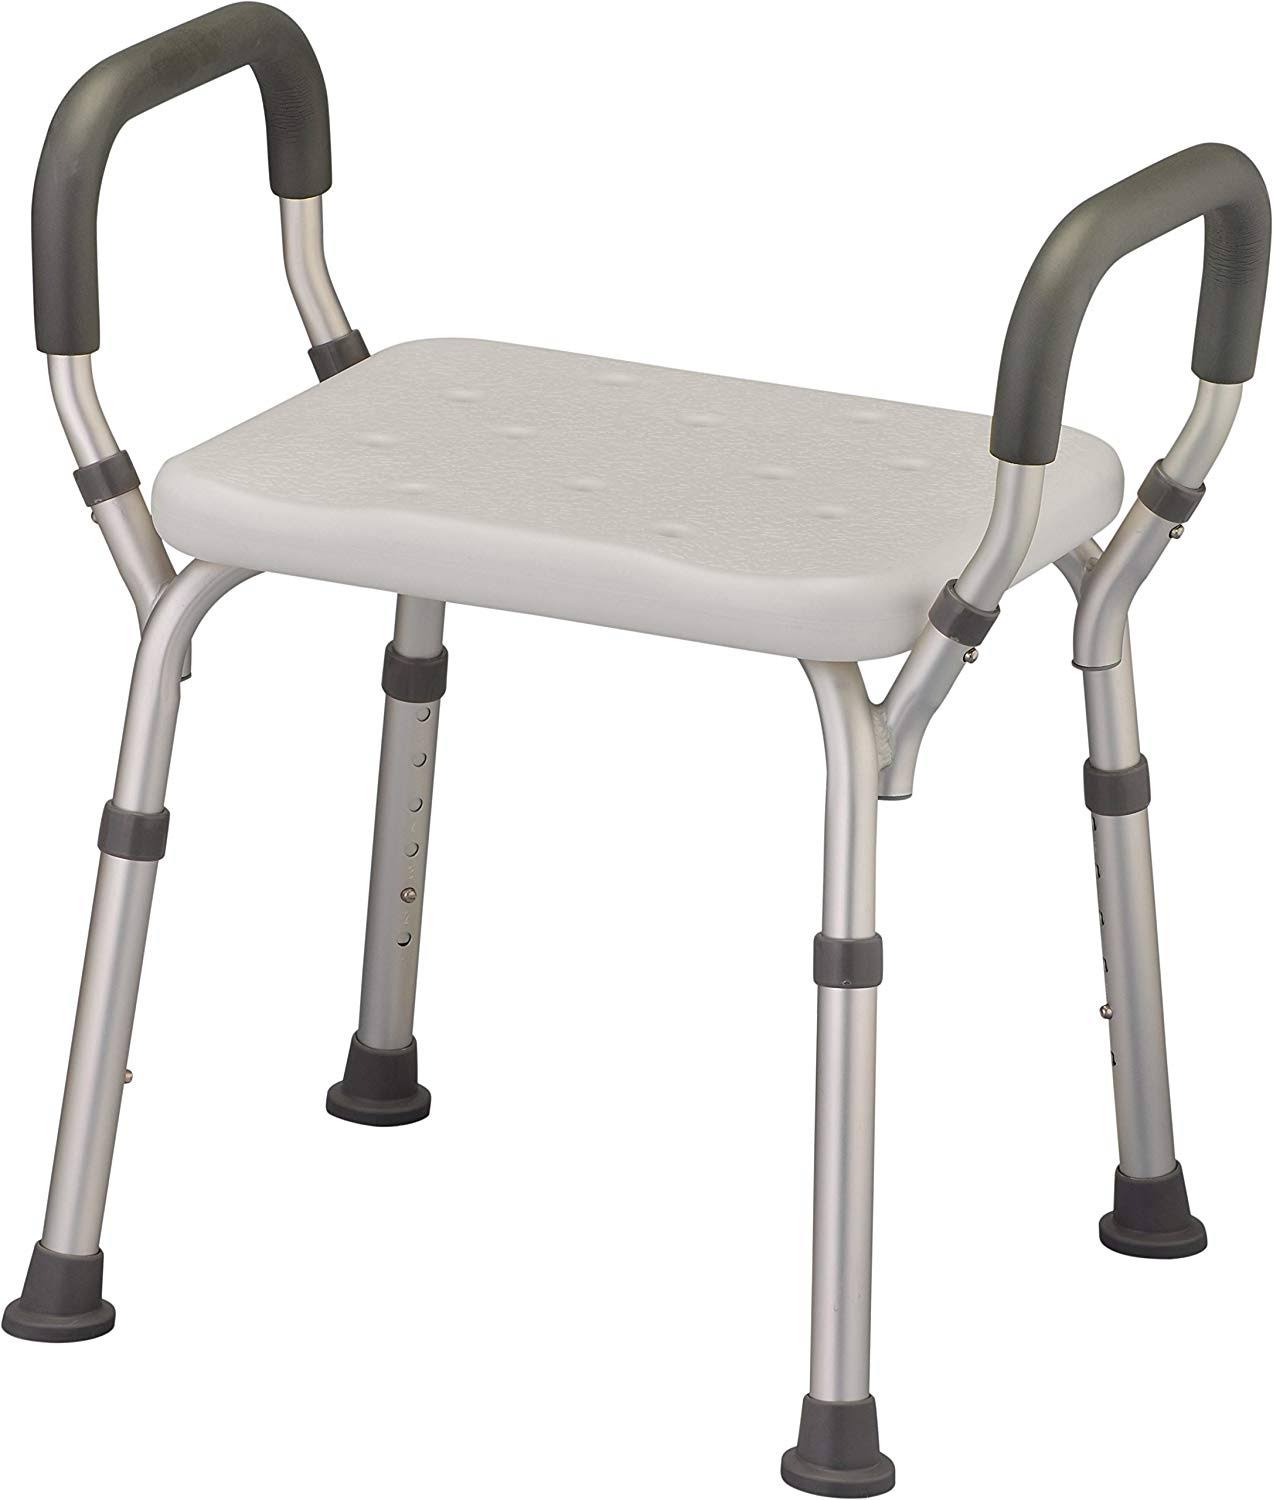 Nova Medical Products Deluxe Bath Seat with Arms - White